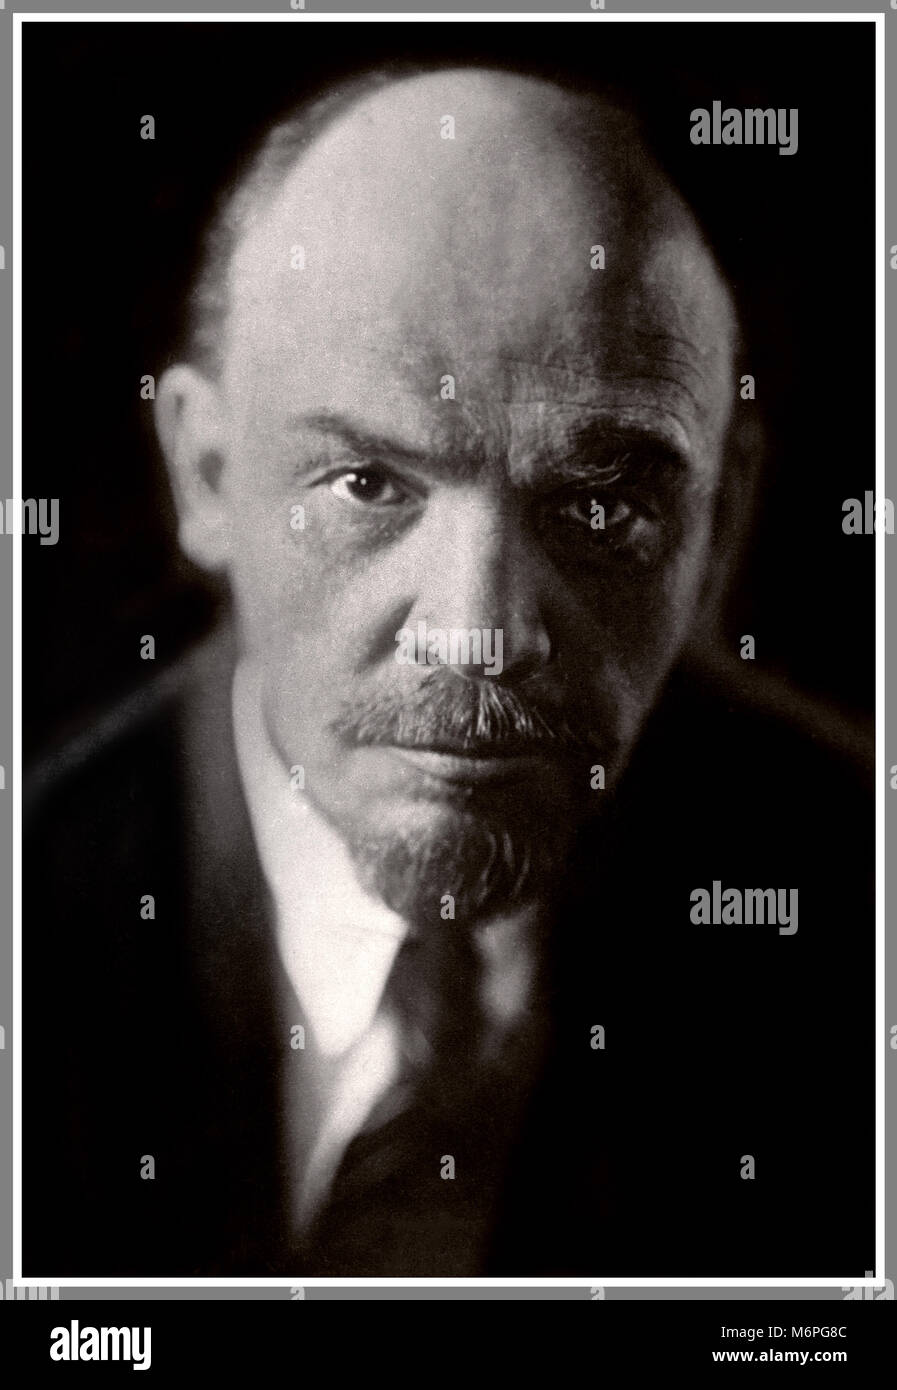 LENIN PORTRAIT powerful carefully restored image of the revolutionary birth named Vladimir Ilyich Ulyanov, a Russian communist revolutionary, politician and political theorist. He was head of the government of Soviet Russia from 1917 to 1924 and of the Soviet Union from 1922 to1924. Stock Photo